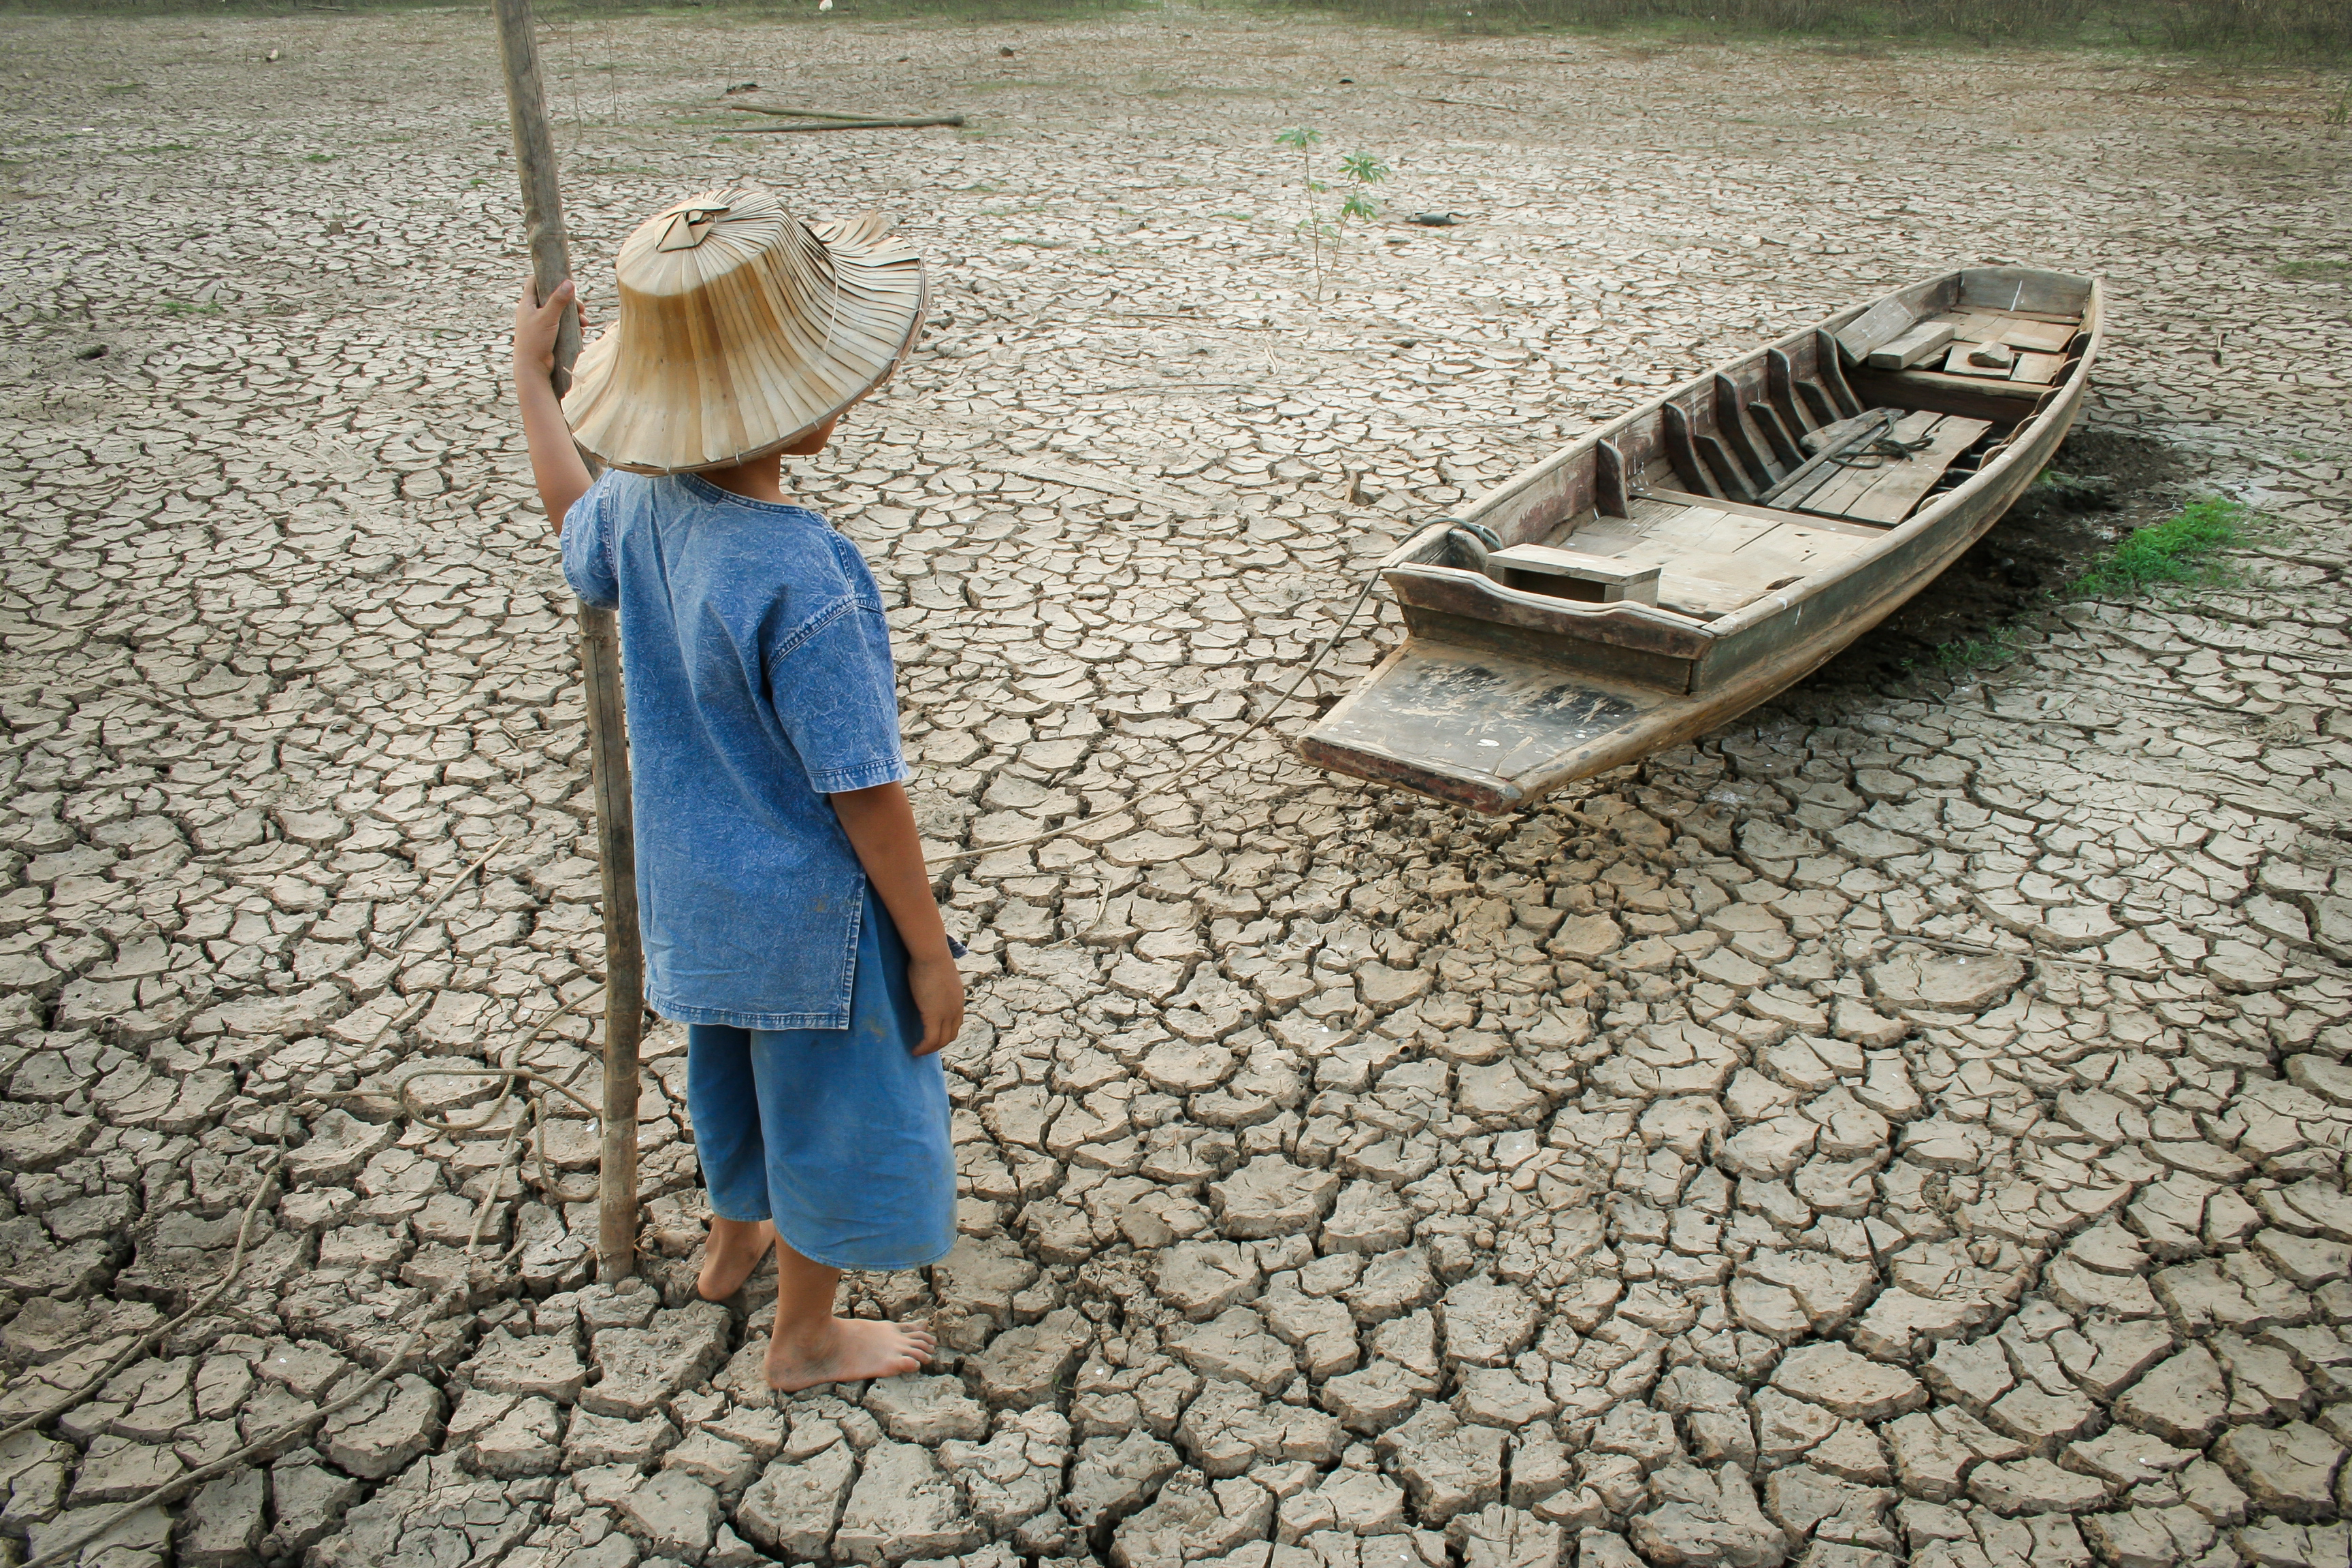 Child standing near a wooden boat on cracked earth. Metaphor for climate change.